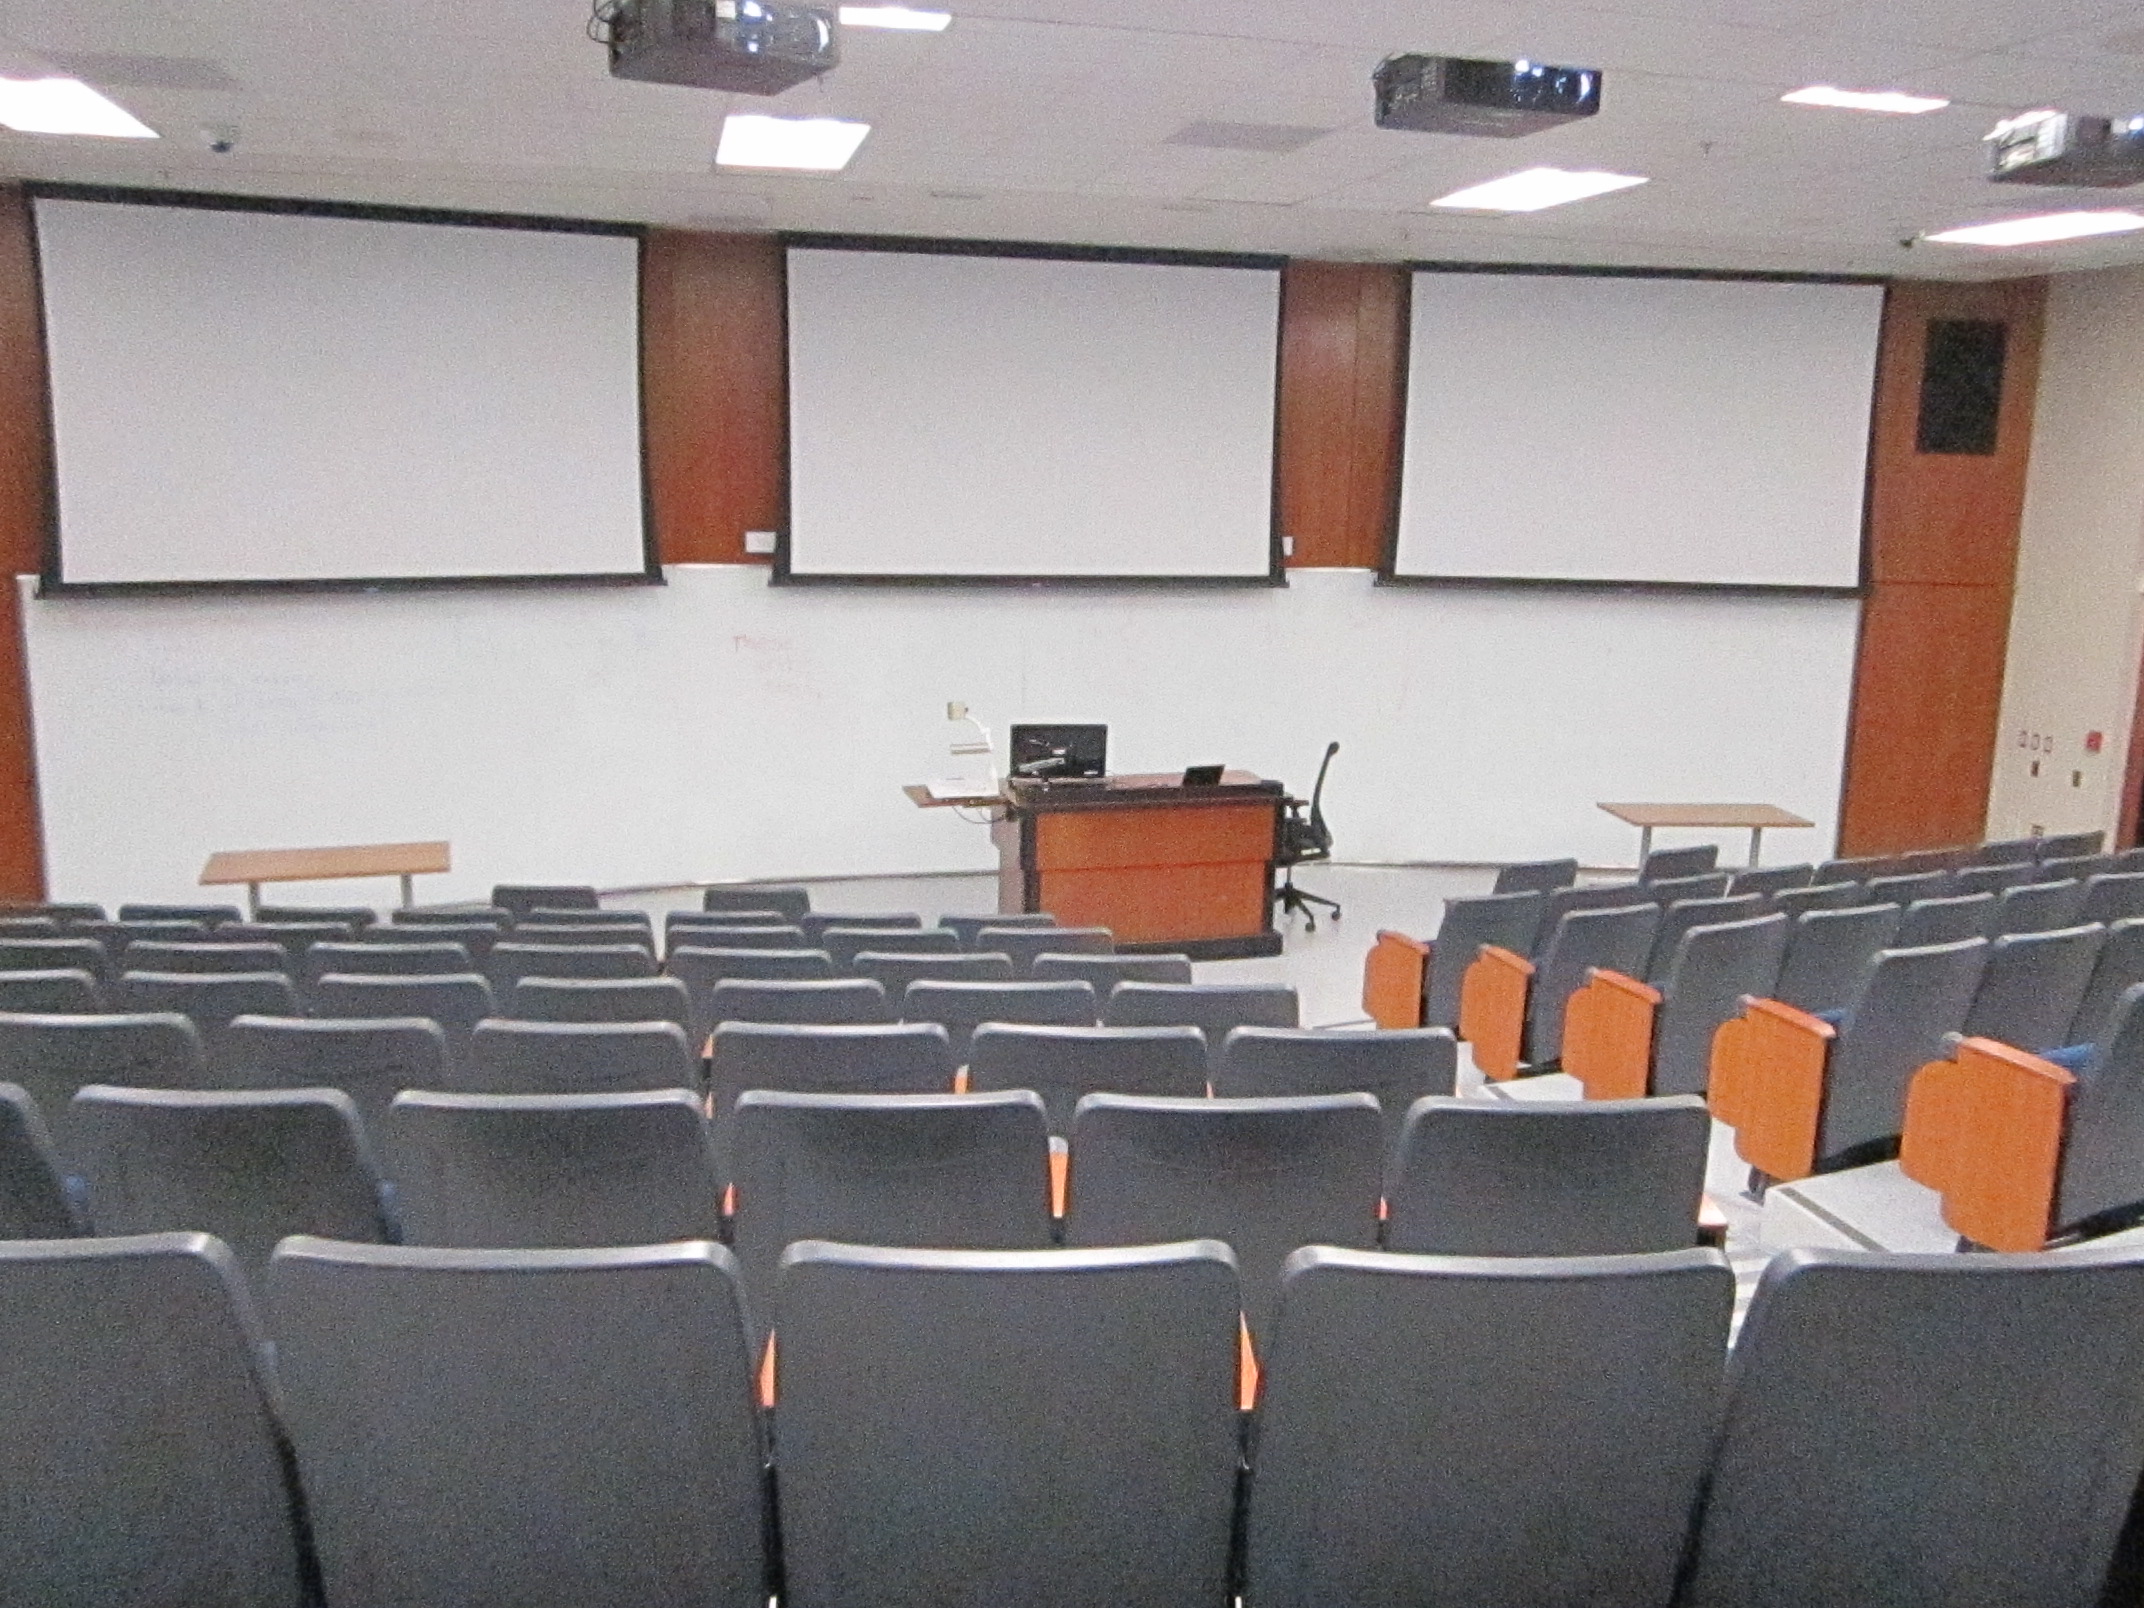 A view of the classroom with theater seating, whiteboard, and instructor table in front.